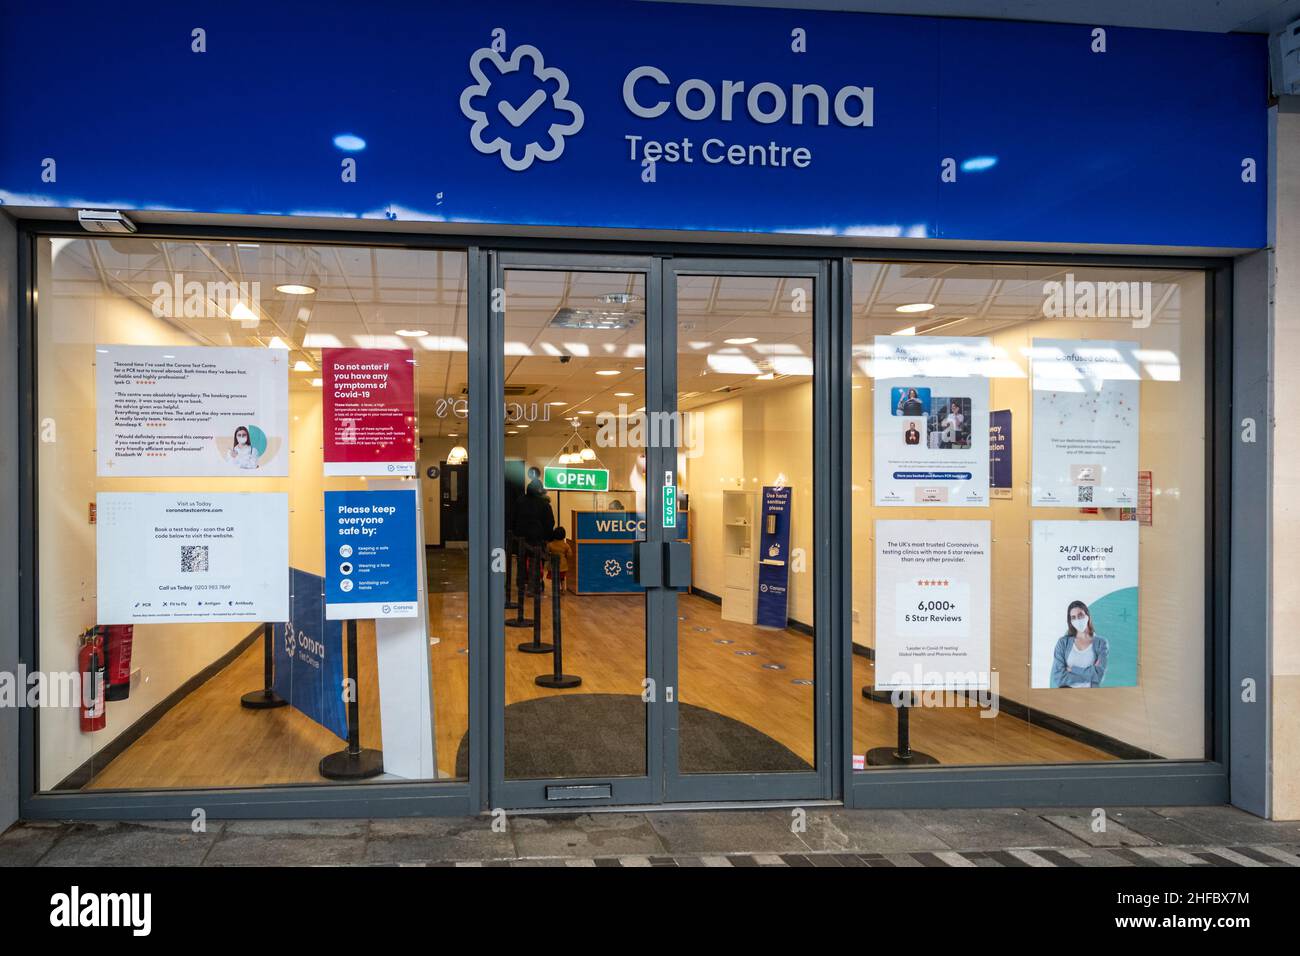 January 2022. A Corona Test Centre in Woking town centre, Surrey, UK, which carries out PCR tests for Covid-19 coronavirus on asymptomatic people before and after foreign travel. Stock Photo